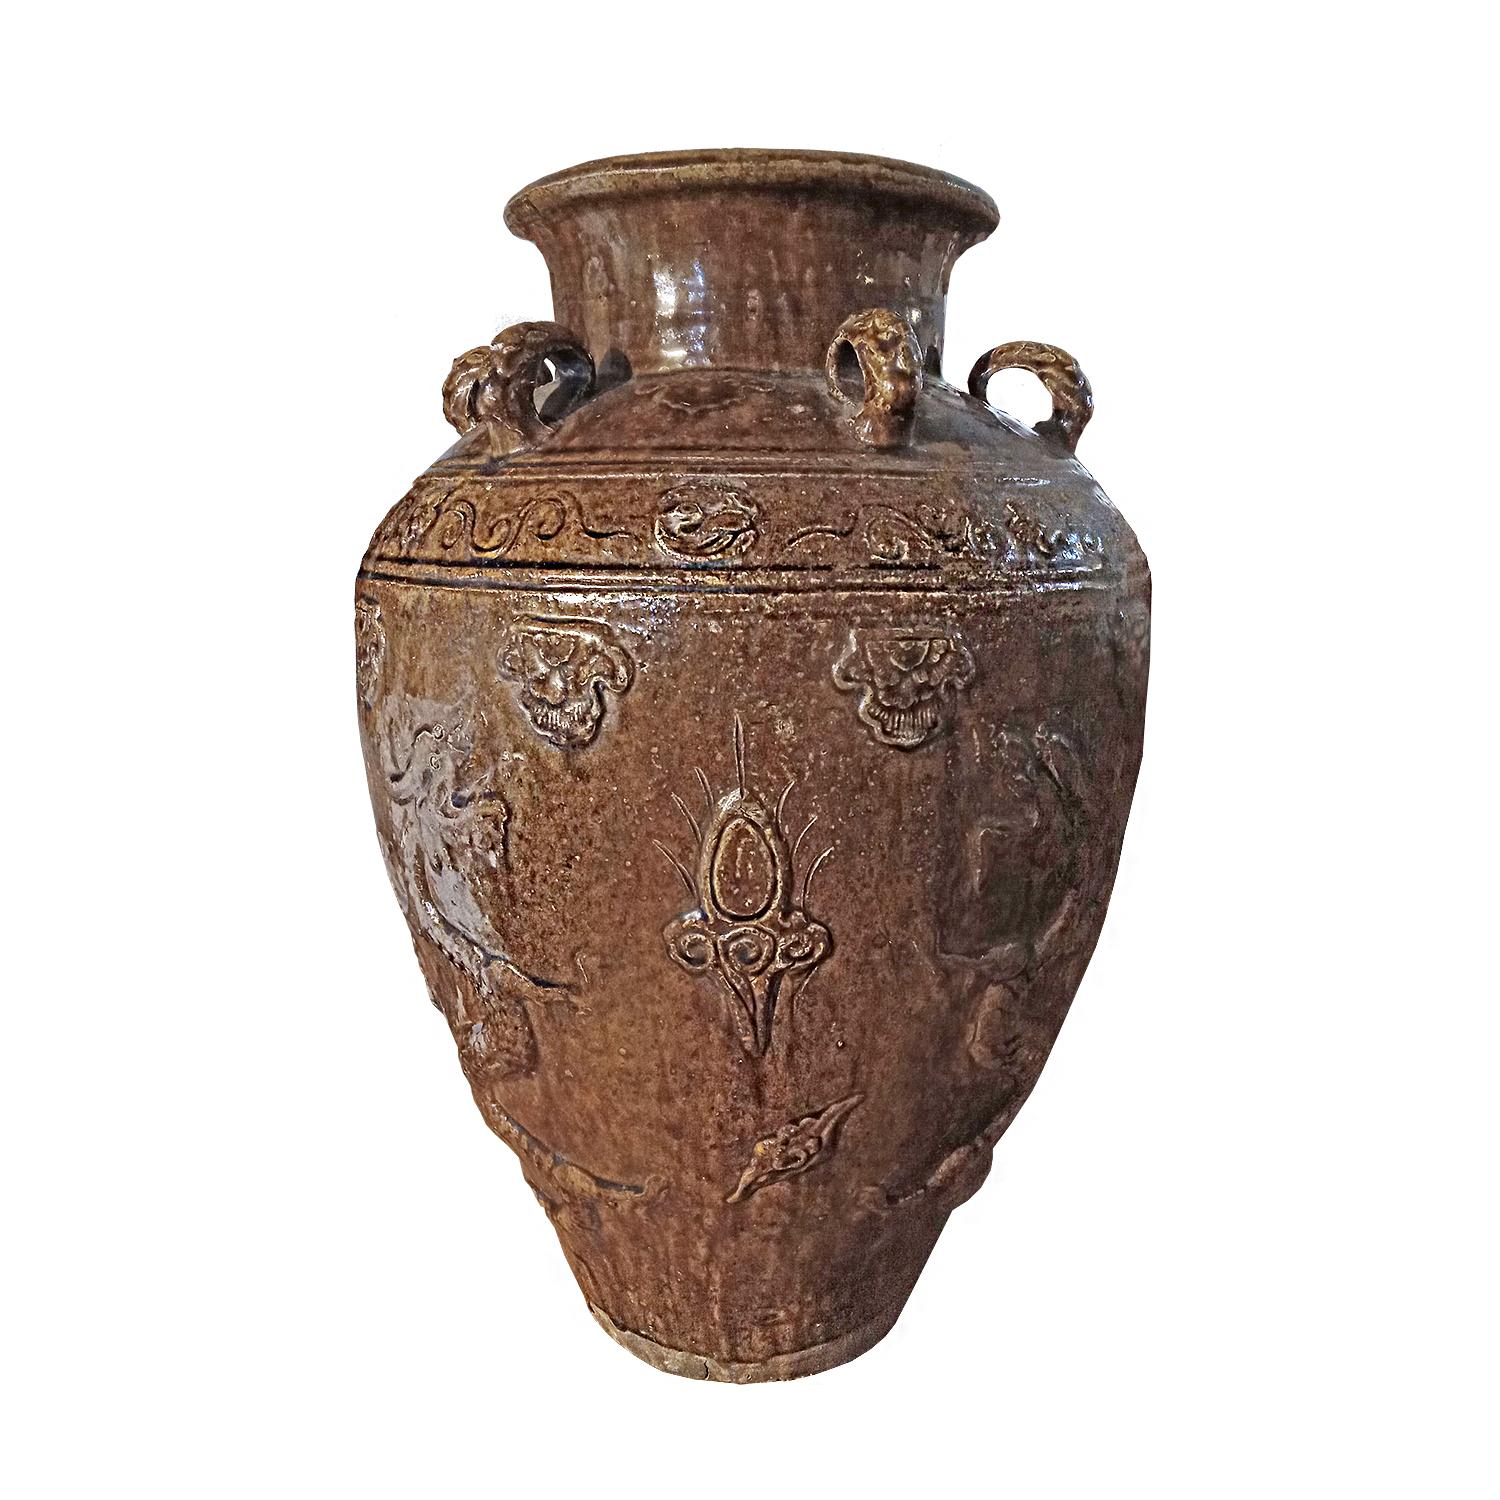 Indonesian Terracotta Urn / Jar / Vase with Brown Glaze and Dragon Motif For Sale 1